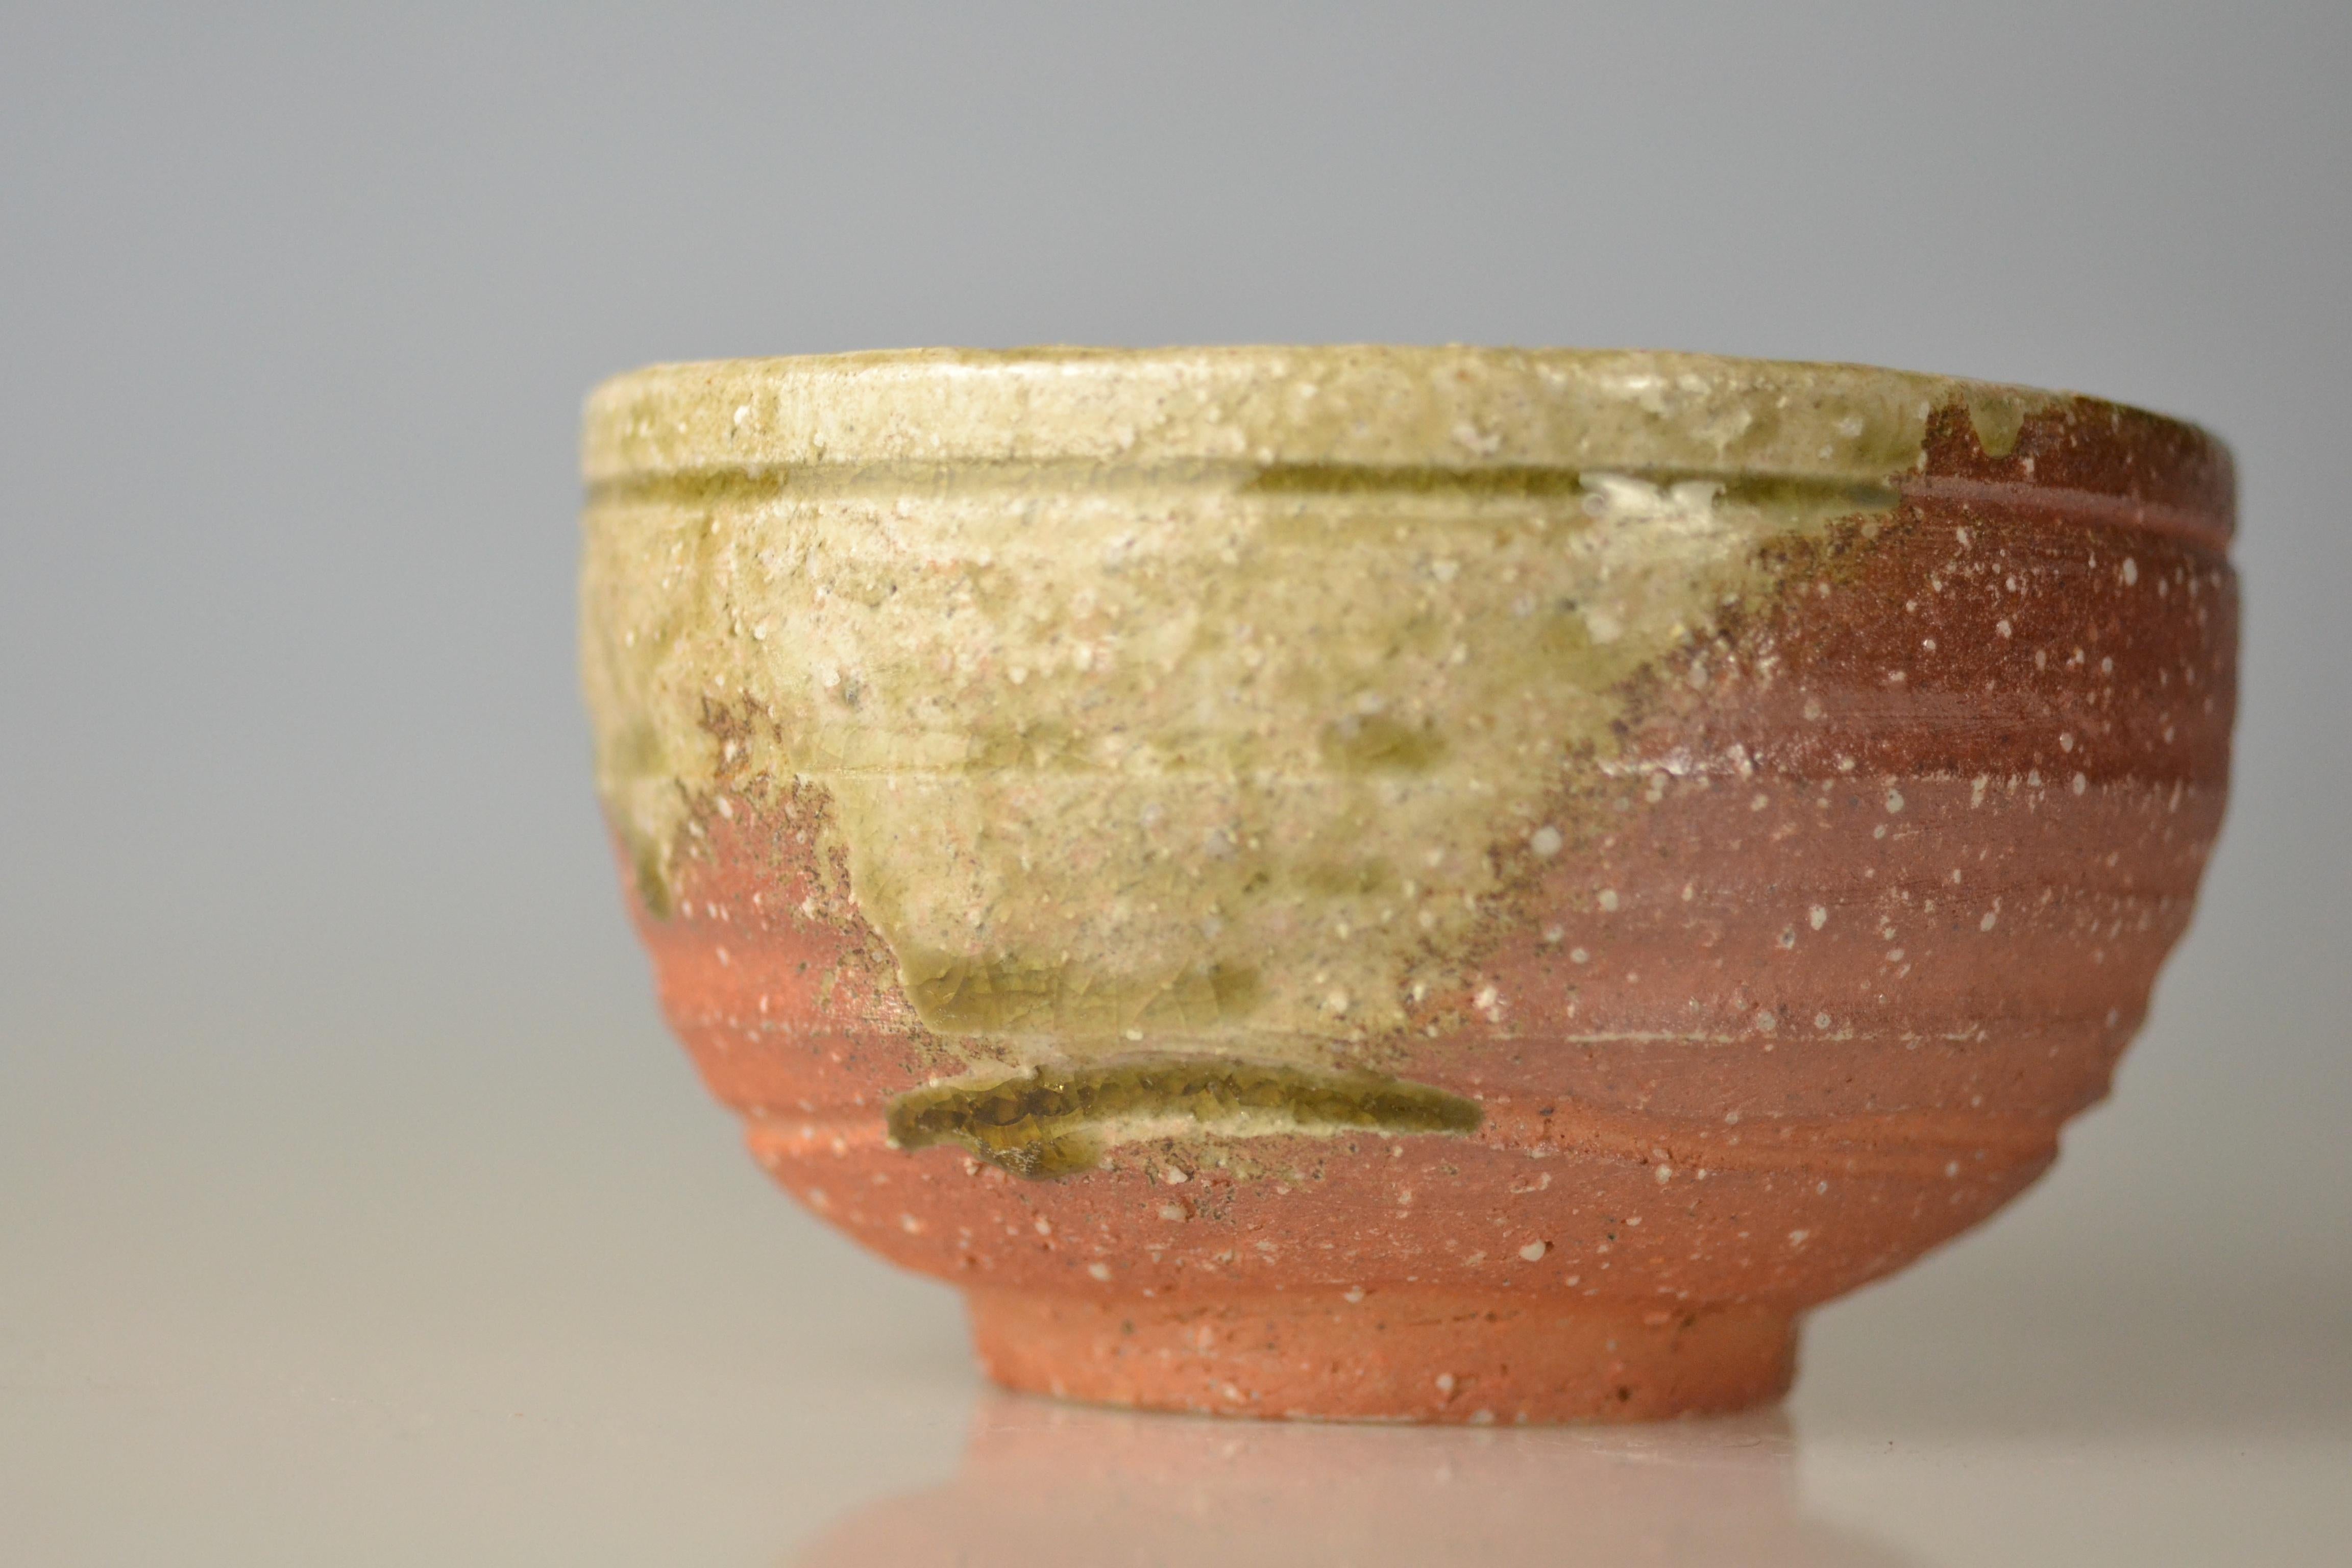 Japanese Woodfired Handmade Matcha Tea Bowl by Takahashi Rakusai IV In Excellent Condition For Sale In Berlin, Berlin